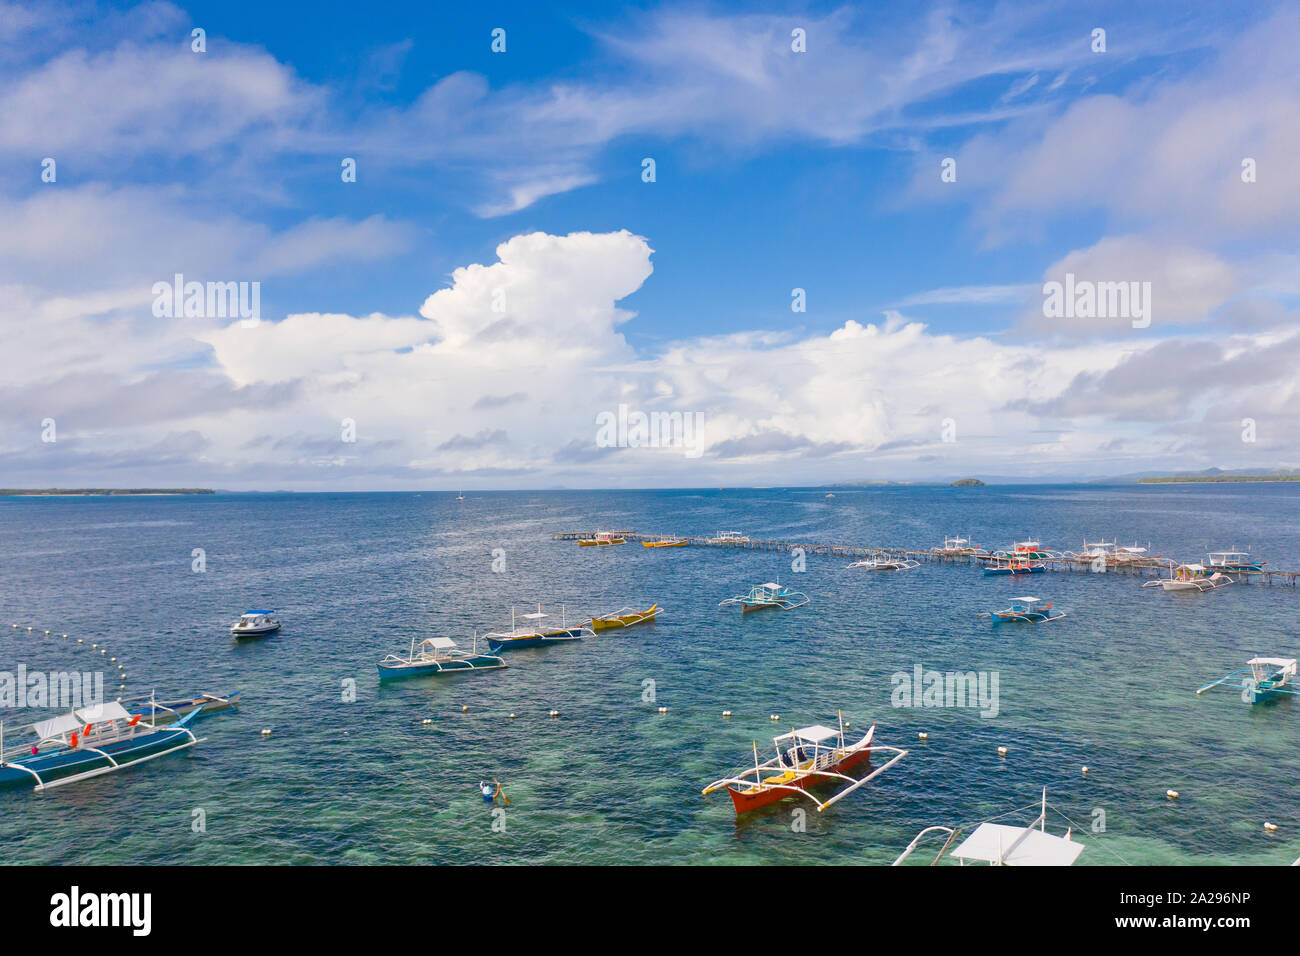 Seascape with boats and clouds. Many tourist boats in the bay during the day. Siargao, Philippines, view from above. Stock Photo